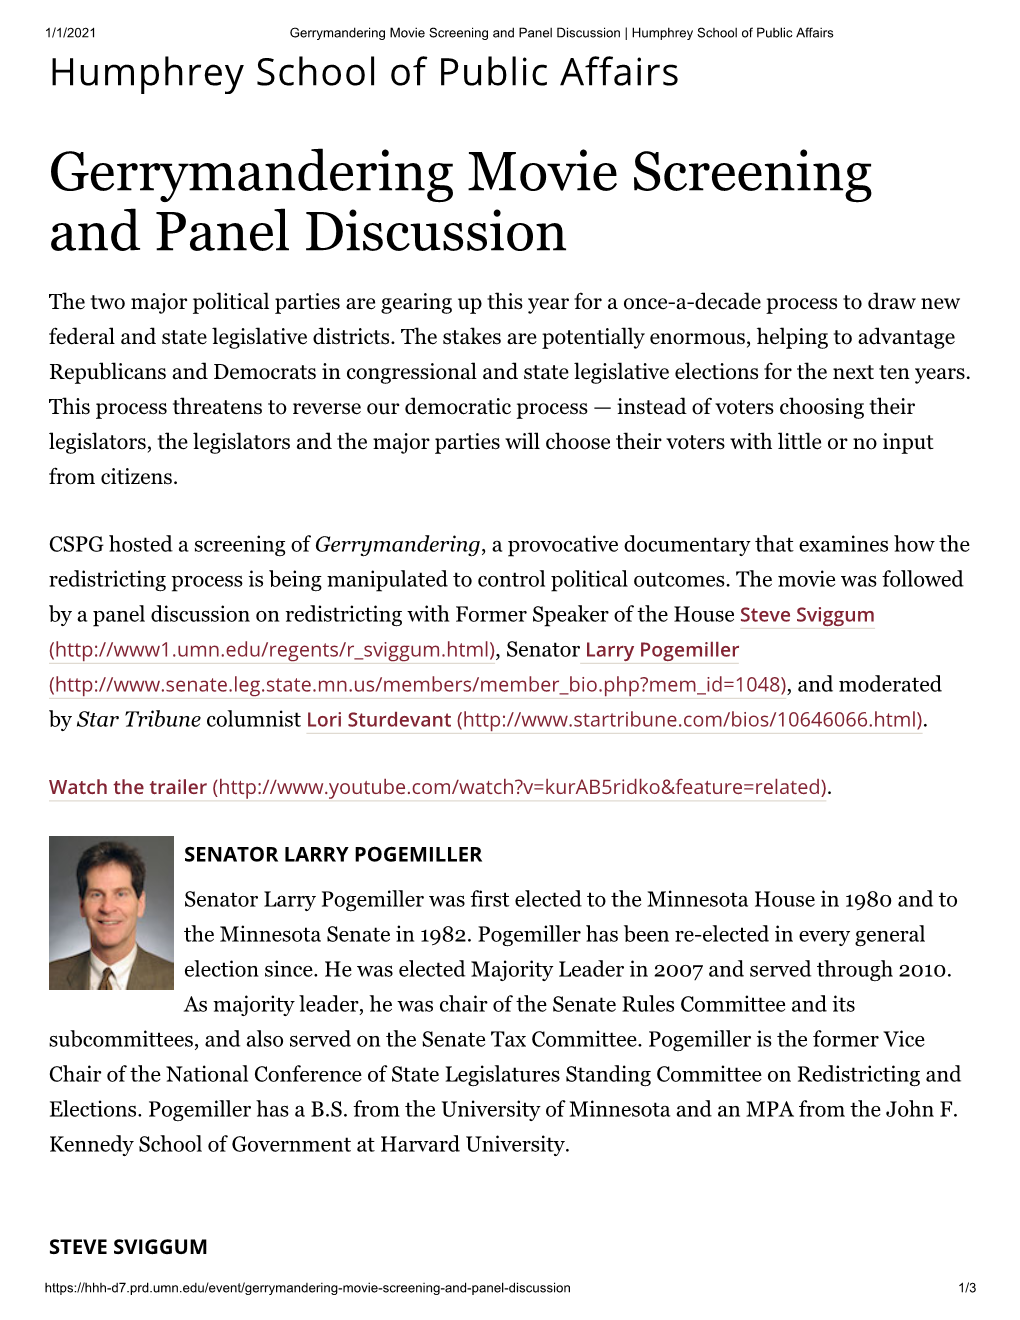 Gerrymandering Movie Screening and Panel Discussion